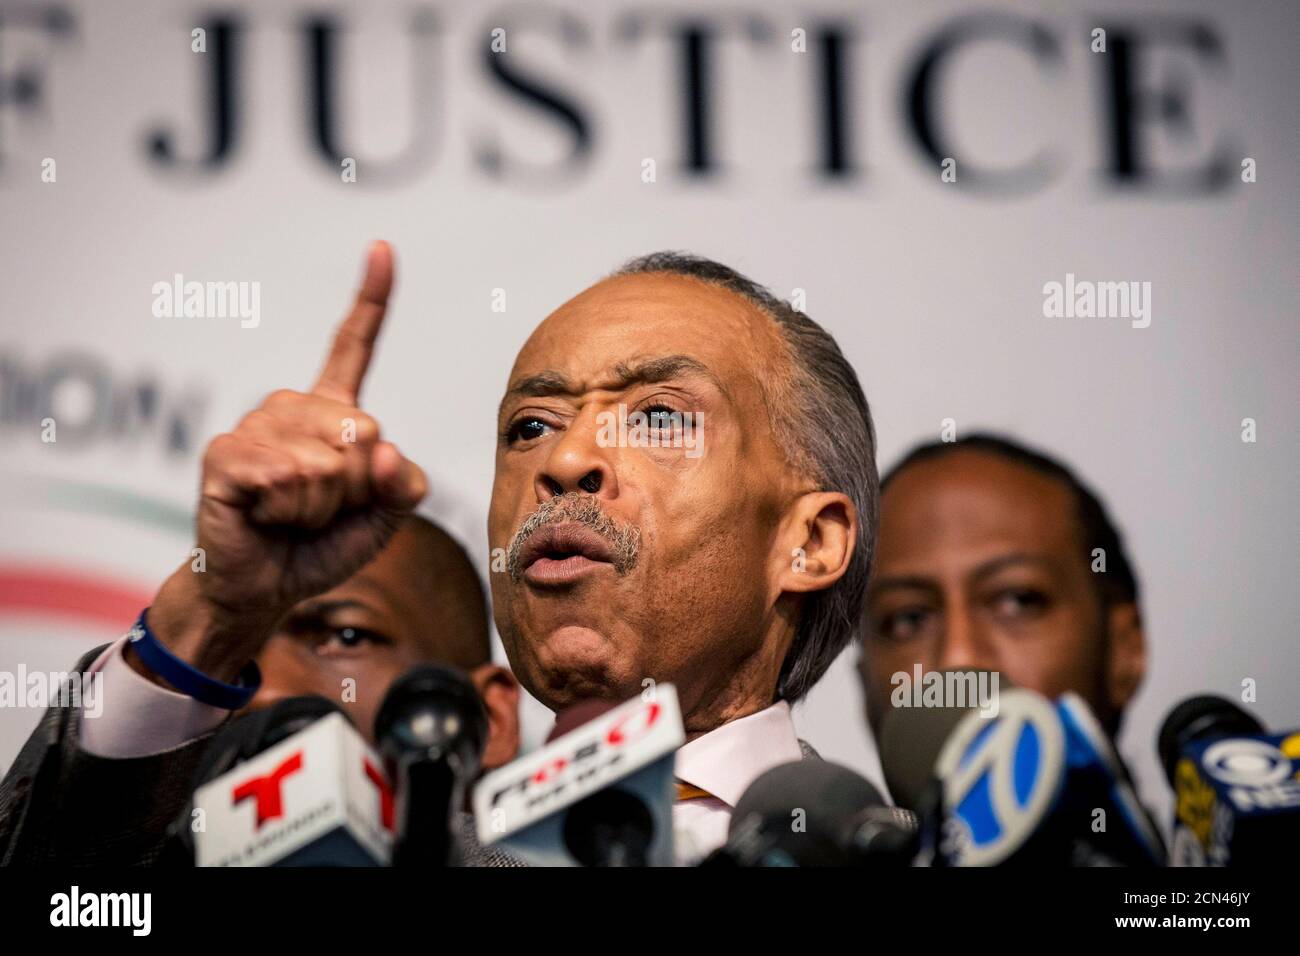 Civil rights activist Al Sharpton (C) speaks during a news conference at the National Action Network in Harlem, New York December 4, 2014. Sharpton and civil rights leaders hold a press conference the day after thousands of demonstrators blocked streets, snarling New York City traffic into early Thursday morning, after a grand jury decided not to charge a white police officer for causing the death of an unarmed black man with a chokehold. REUTERS/Brendan McDermid (UNITED STATES - Tags: CIVIL UNREST CRIME LAW POLITICS TPX IMAGES OF THE DAY) Stock Photo